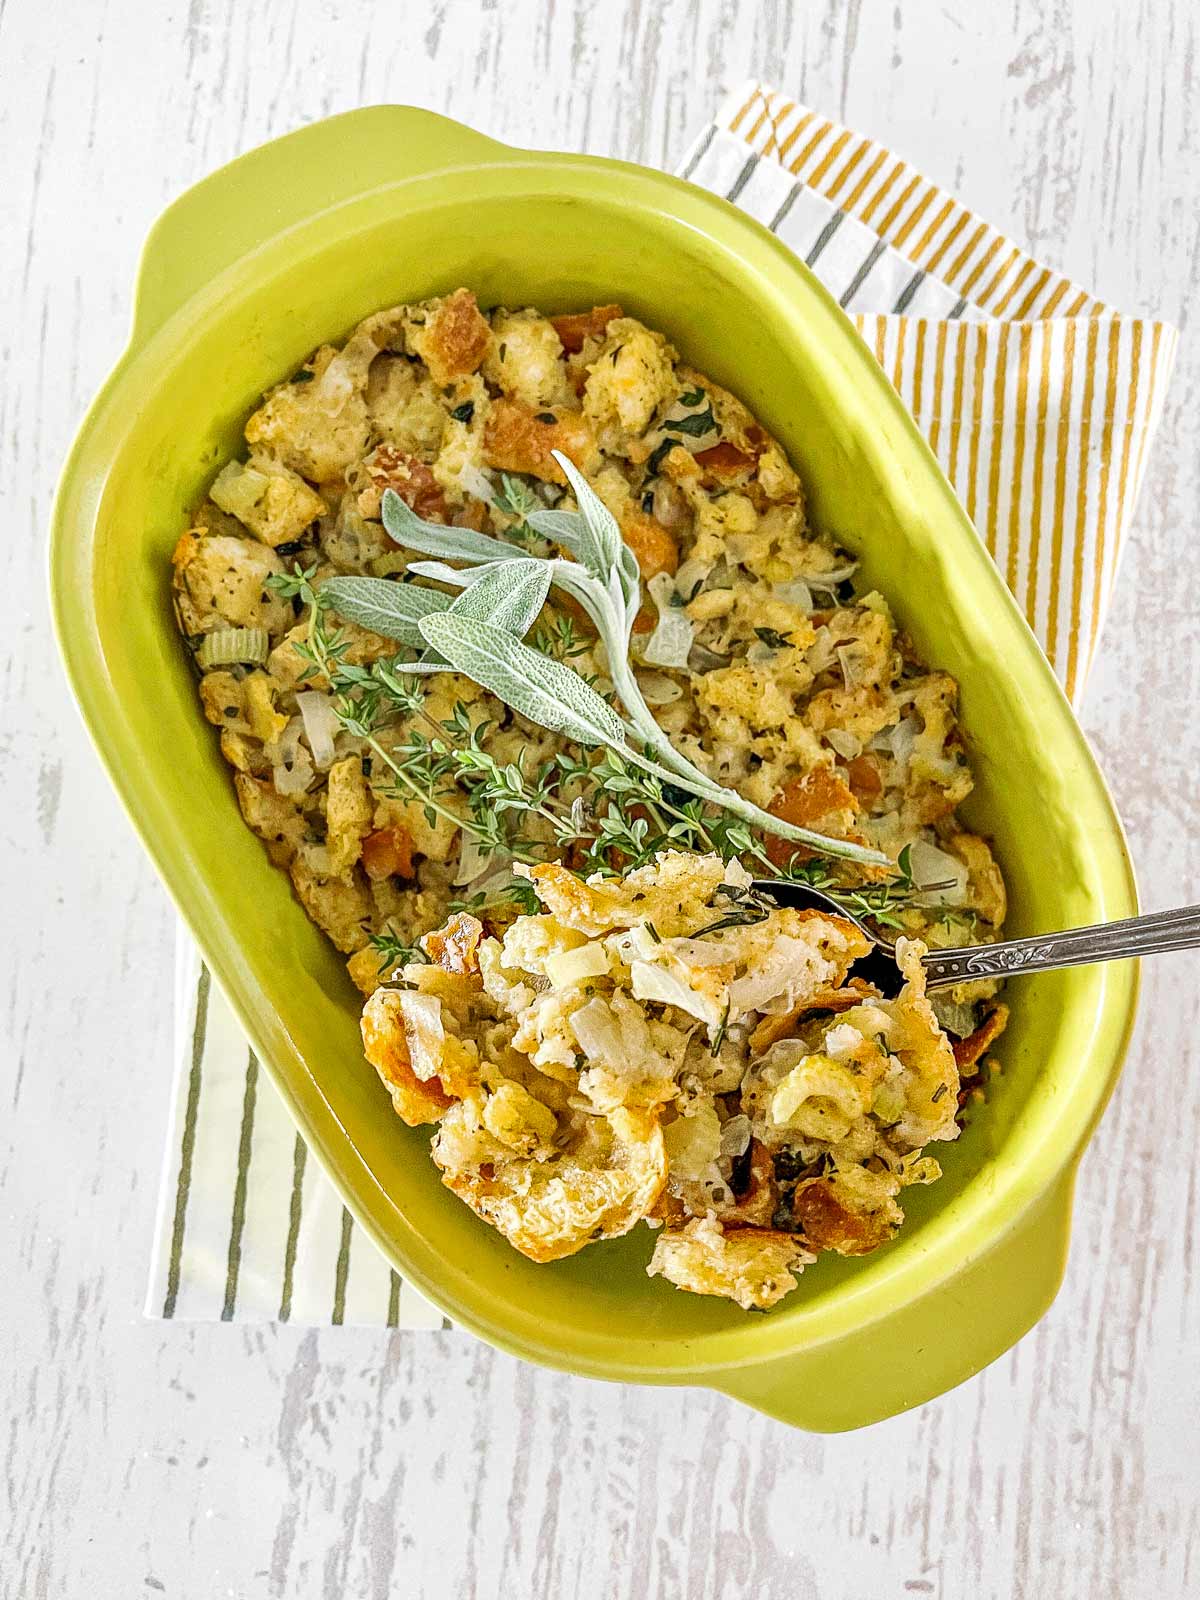 Baking dish with stuffing.